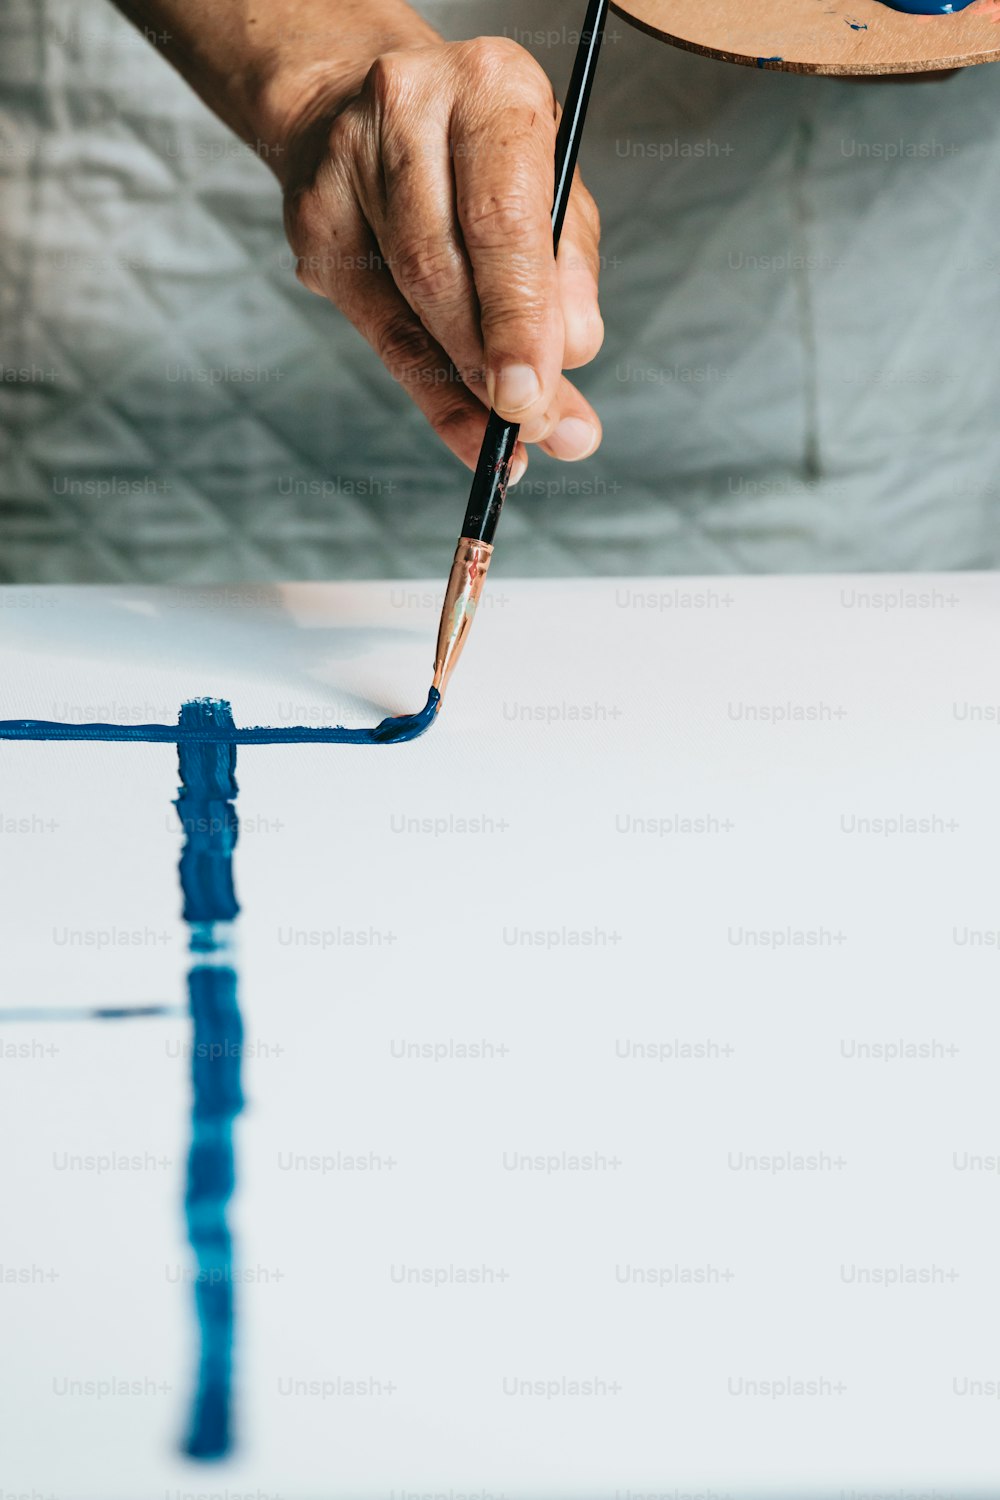 a person holding a paintbrush and painting a piece of paper